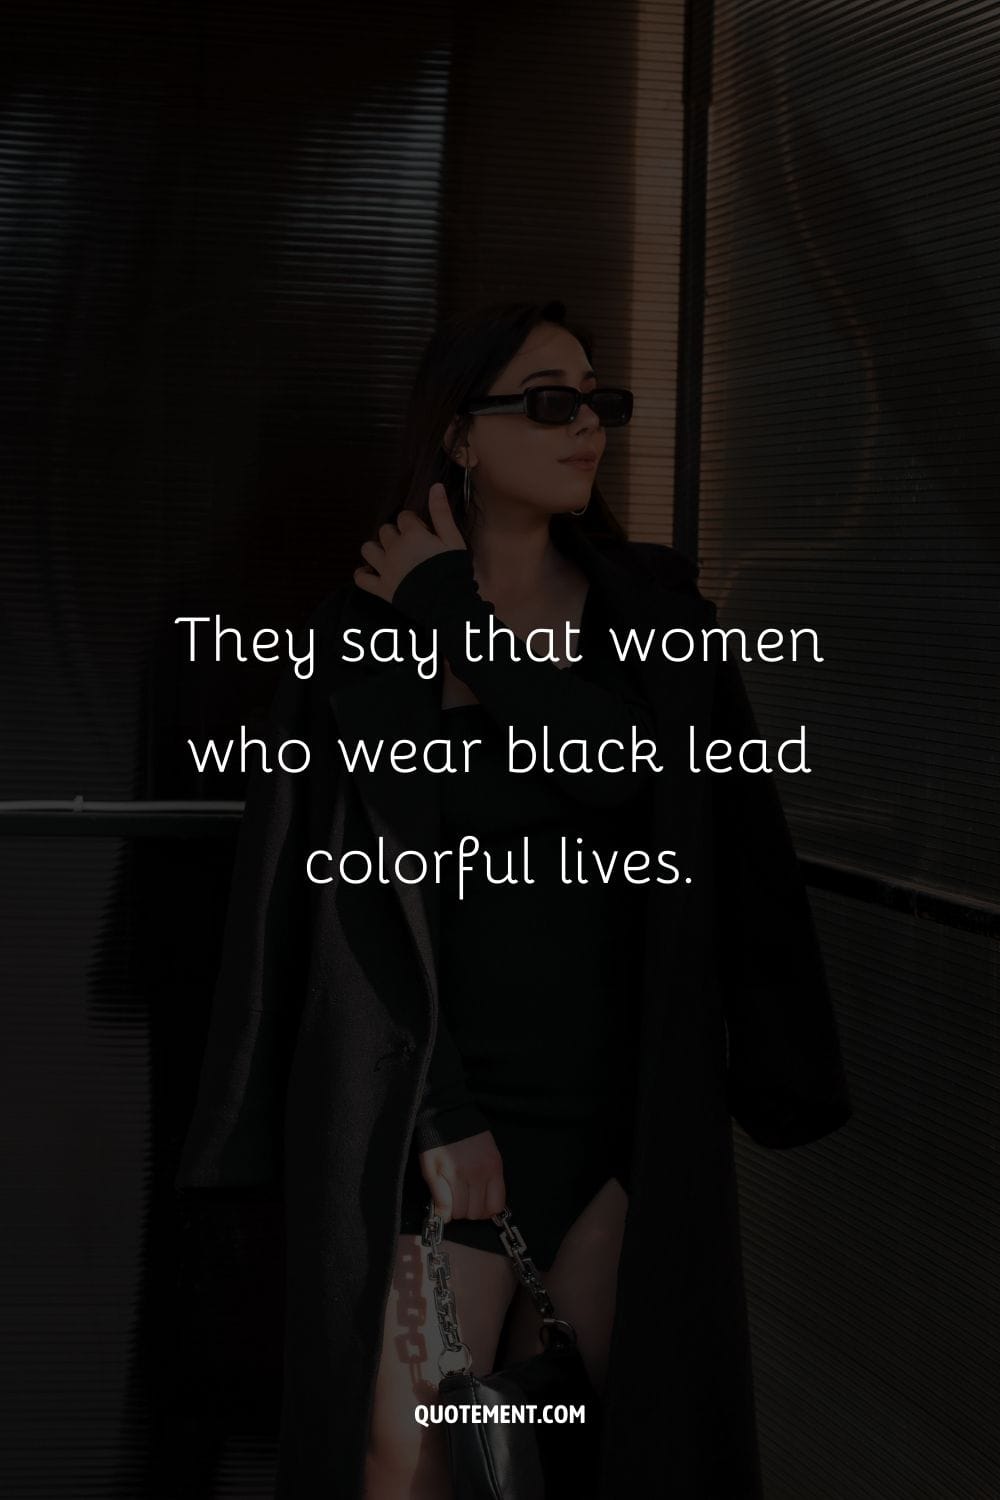 They say that women who wear black lead colorful lives.